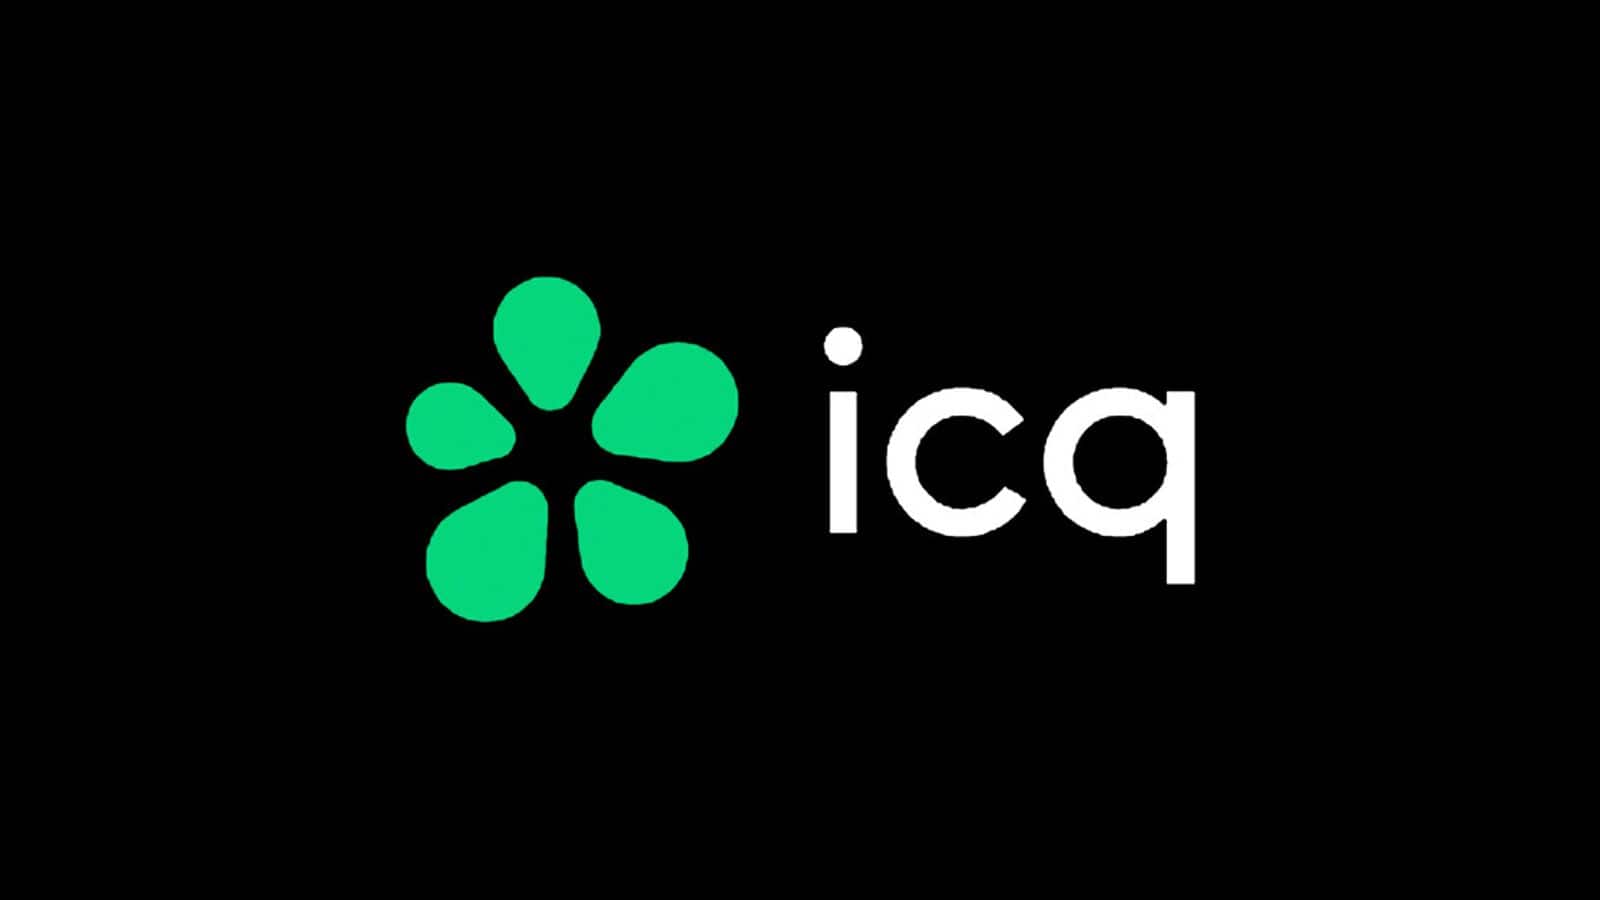 ICQ instant messaging service to shut down after 28 years